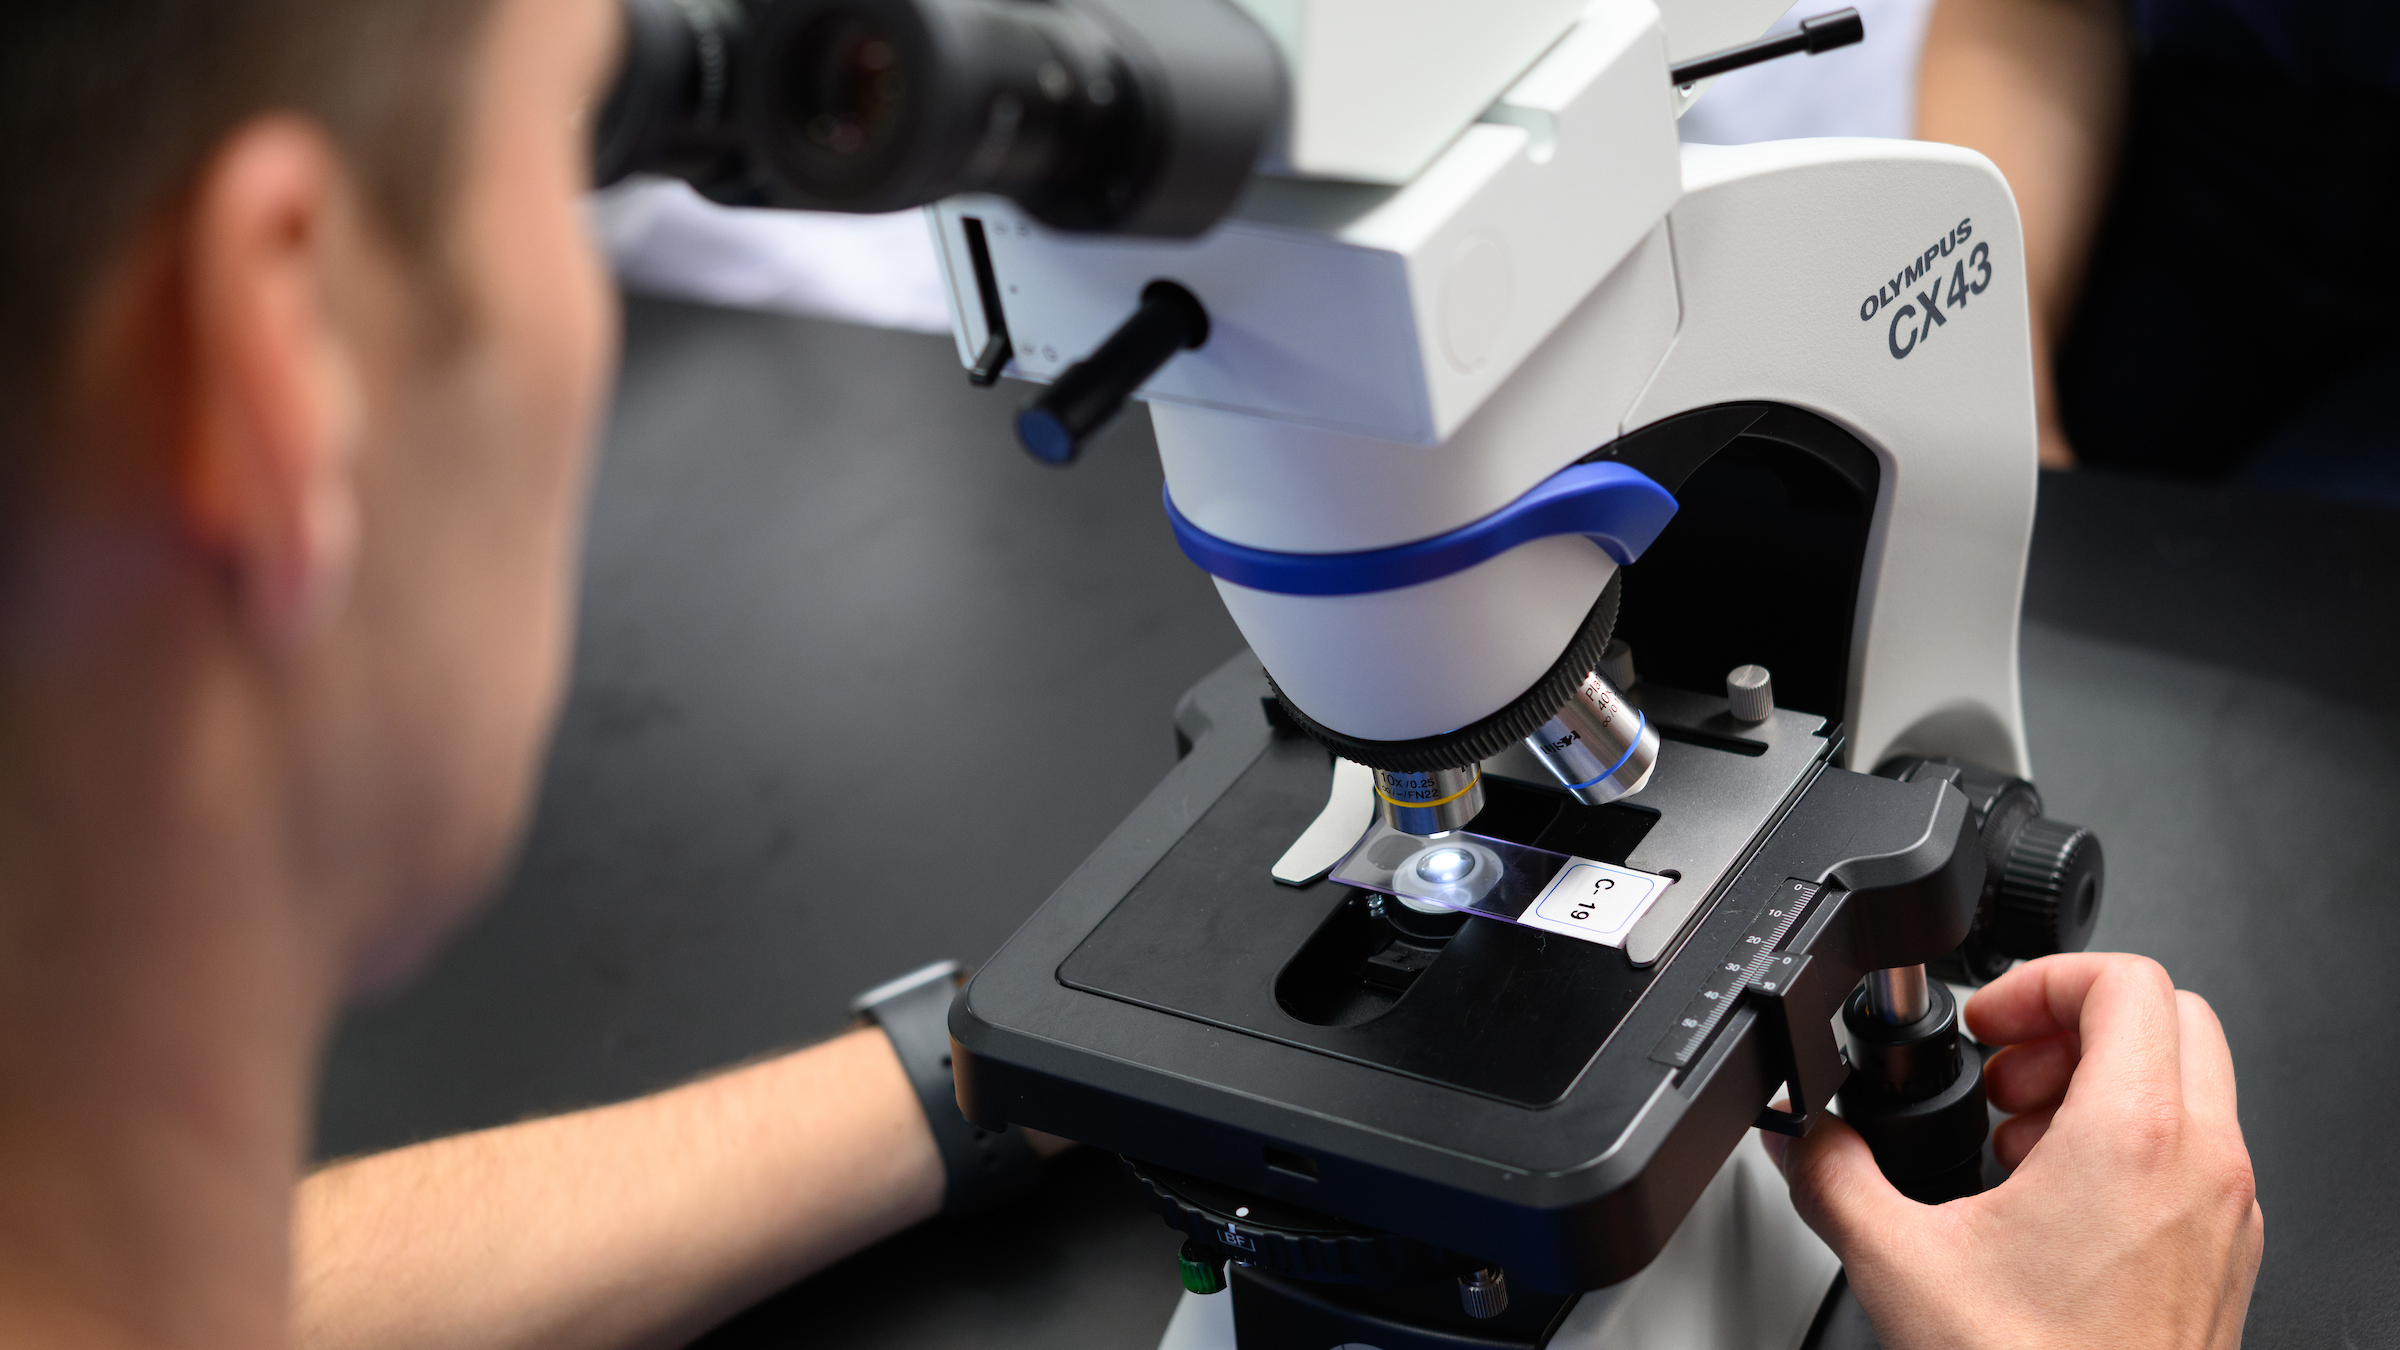 A student looks into a microscope.